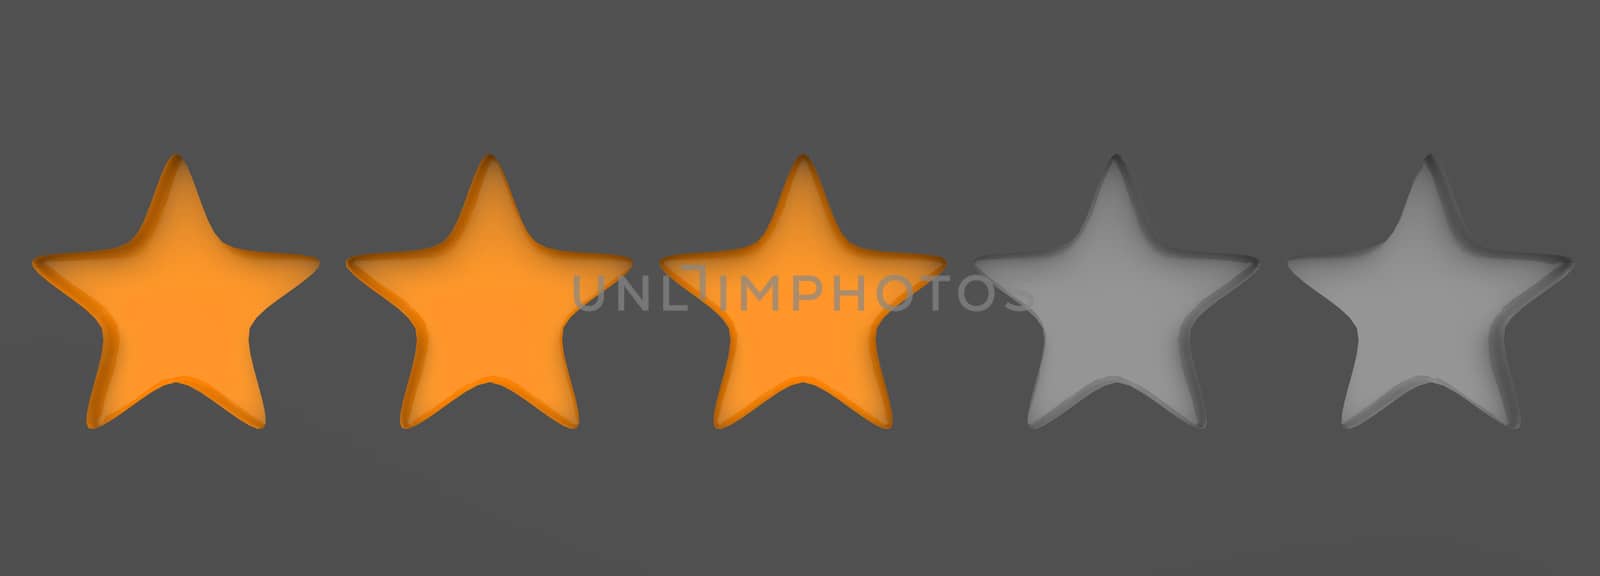 3d three orange star on color background. Render and illustration of golden star for premium review by Andreajk3